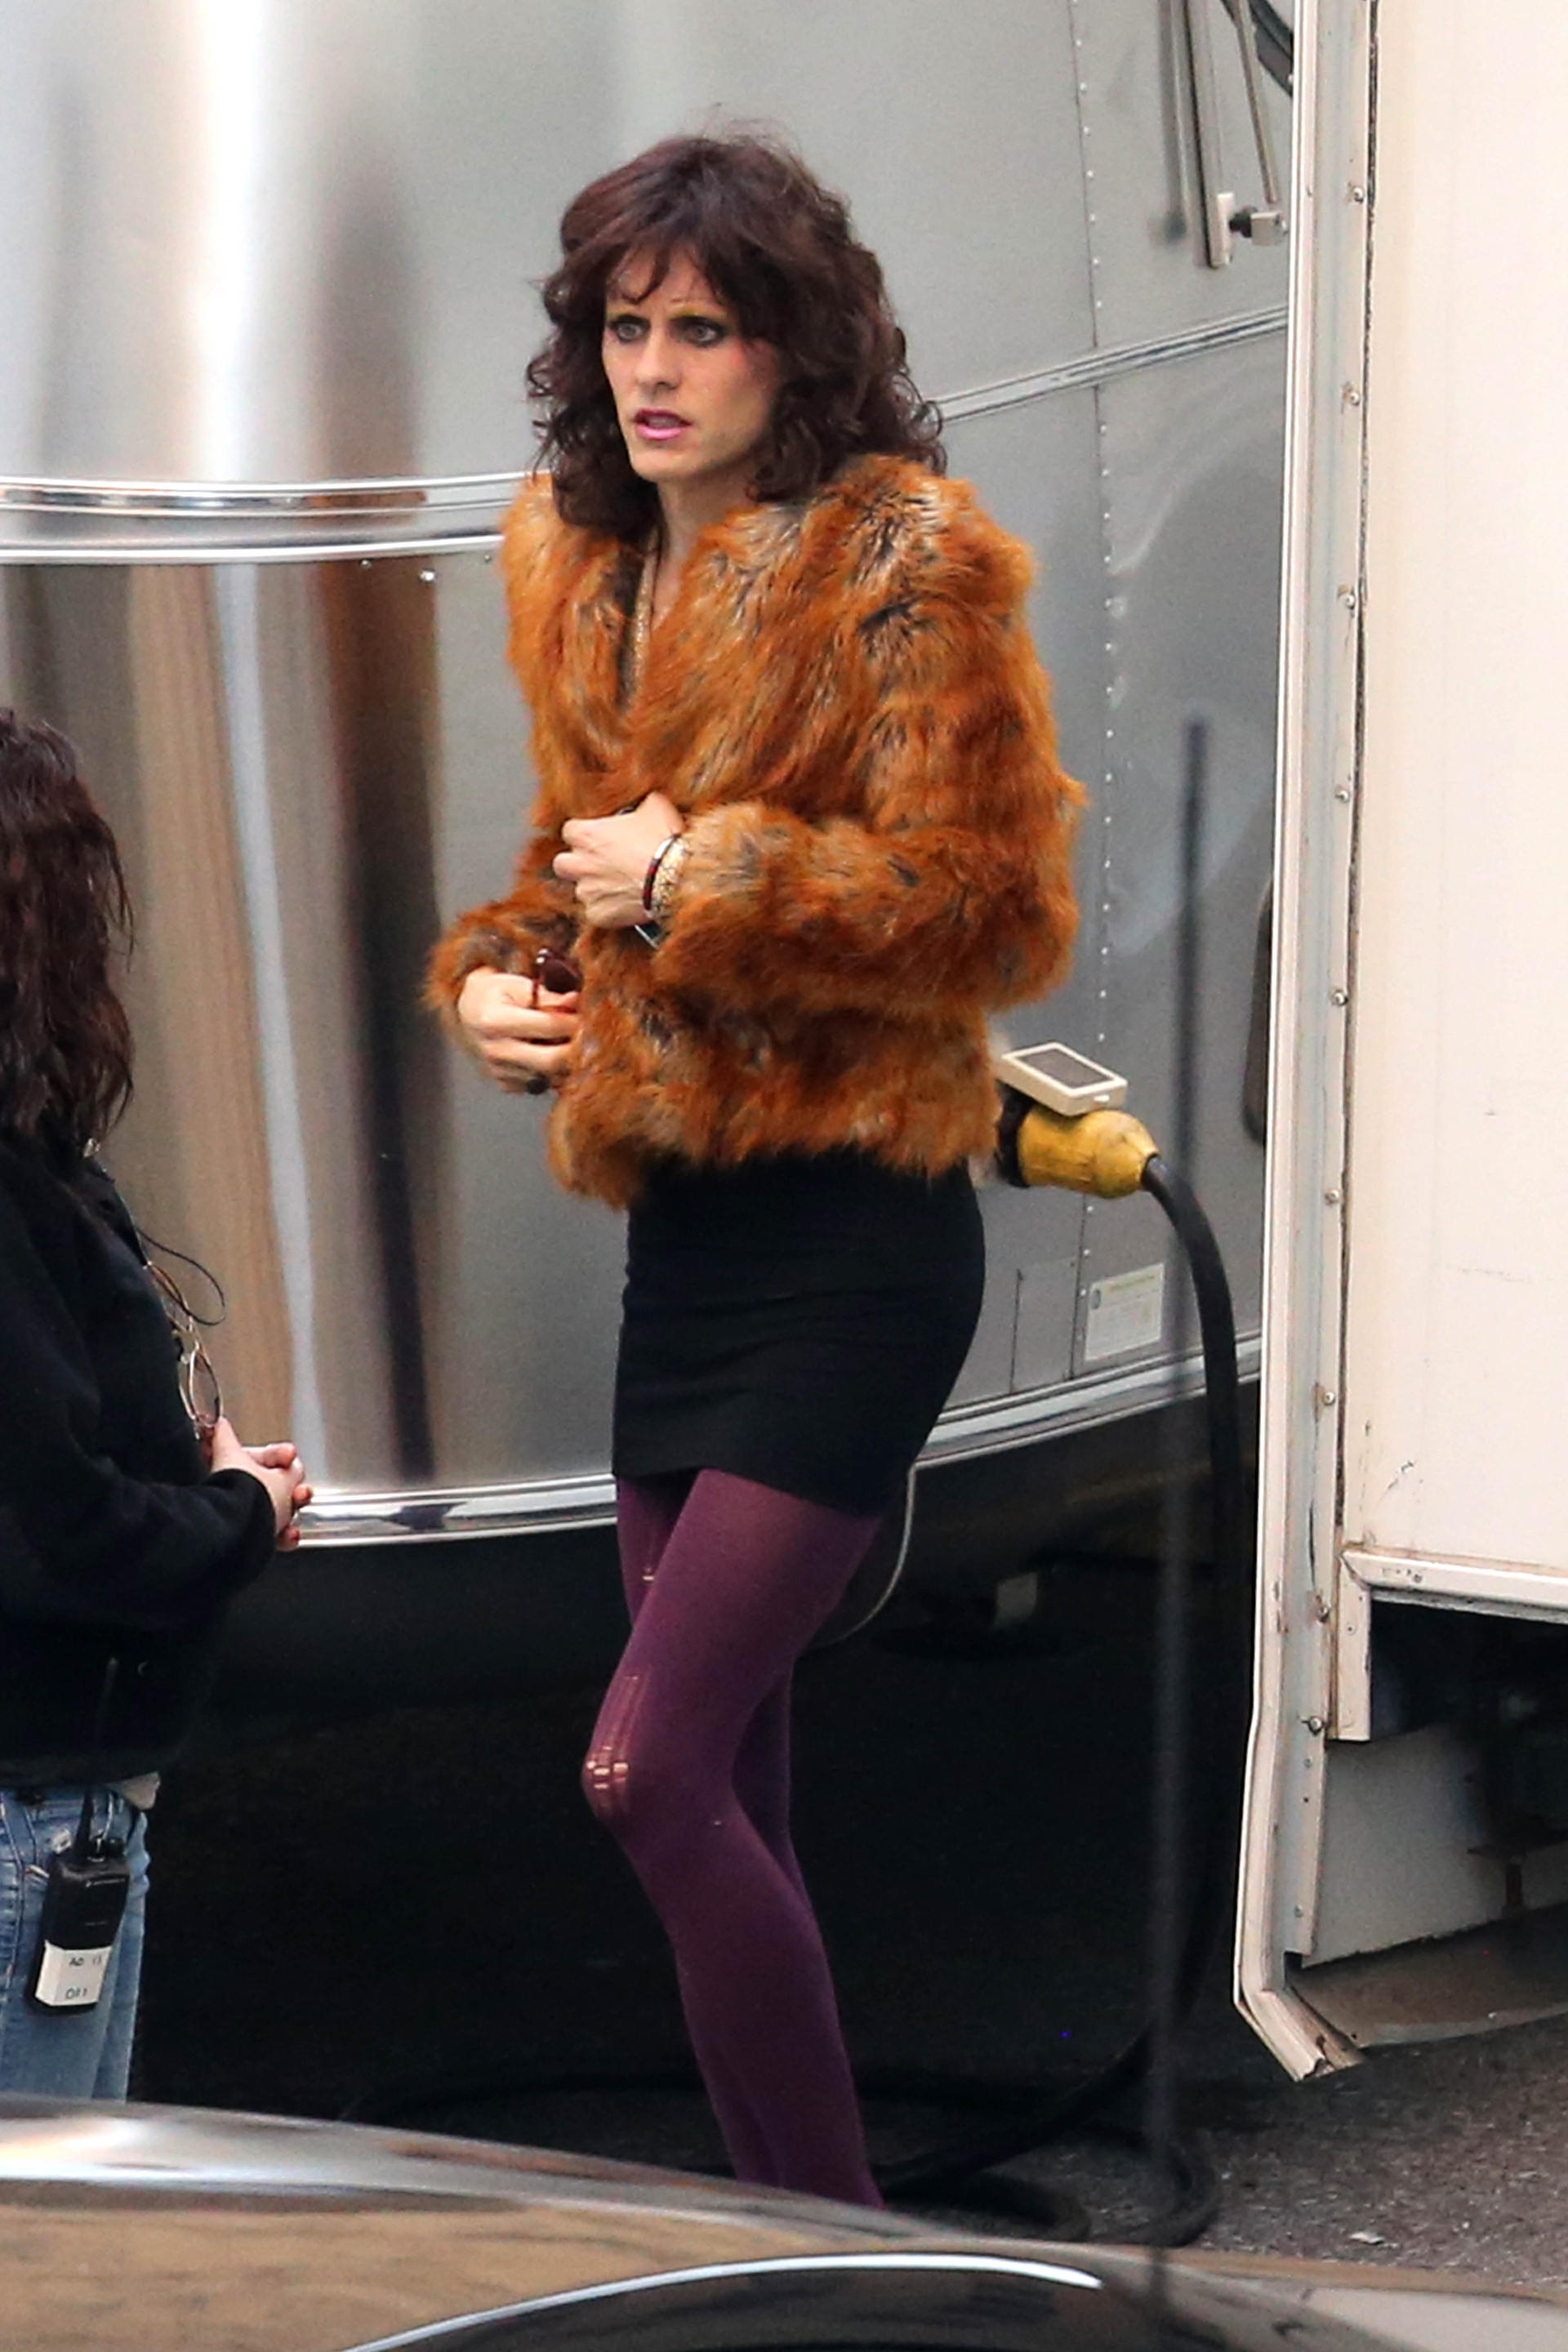 Jared Leto wearing high heels, a mini skirt and a fur coat on his first day of filming ...1920 x 2880